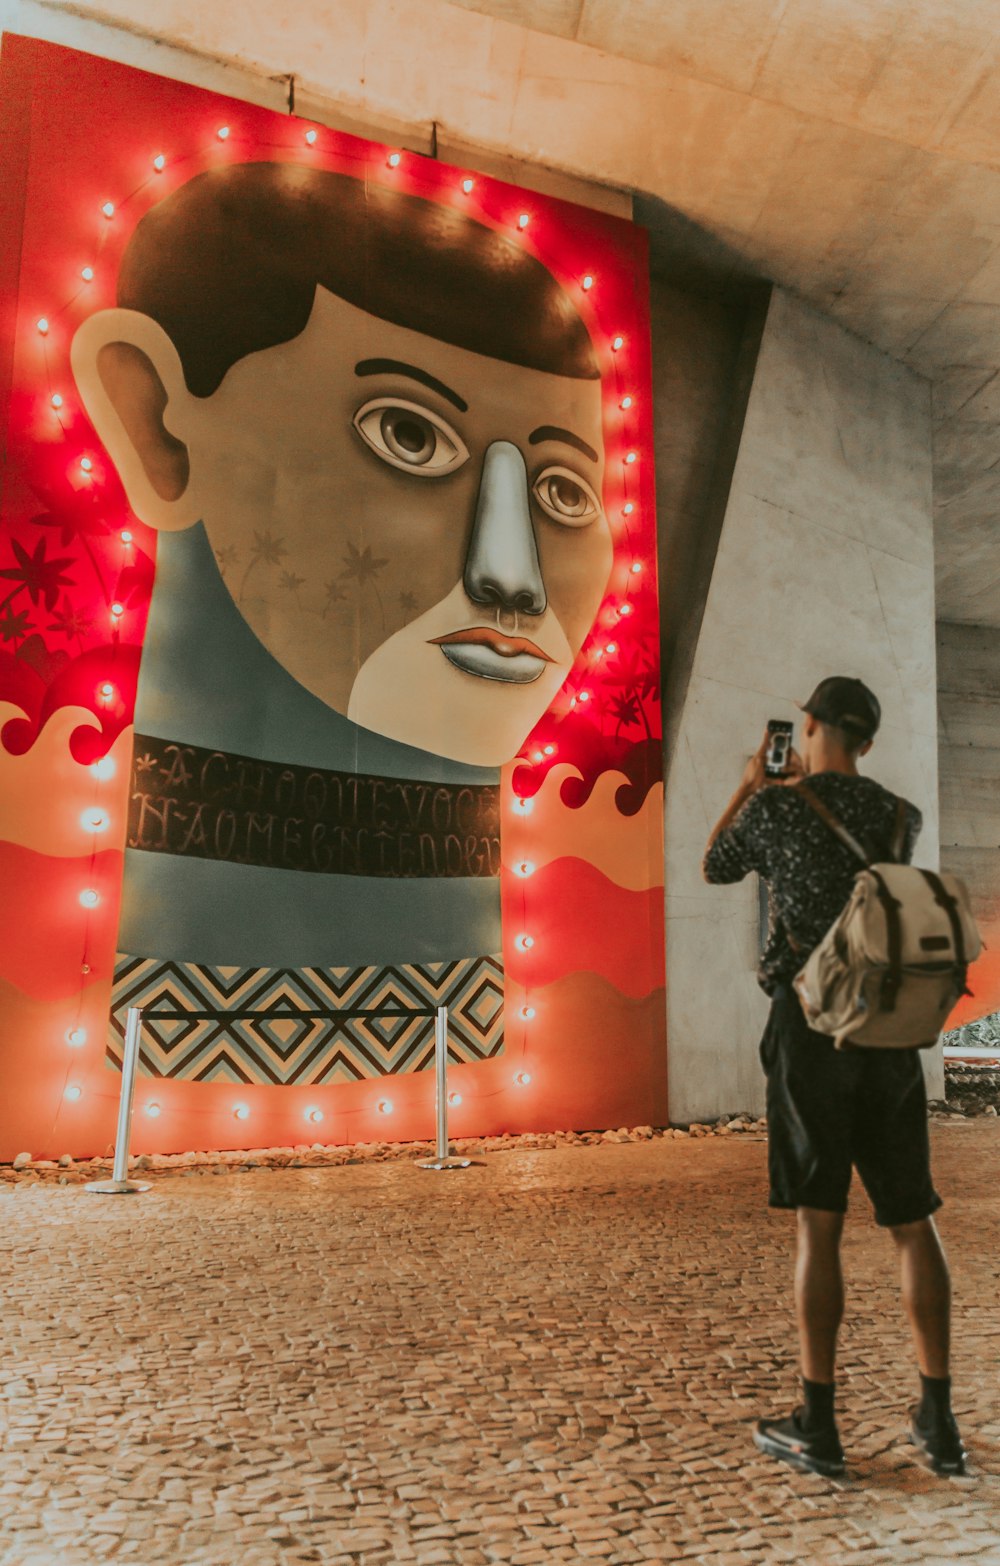 man taking photo of lighted man's face wall mural